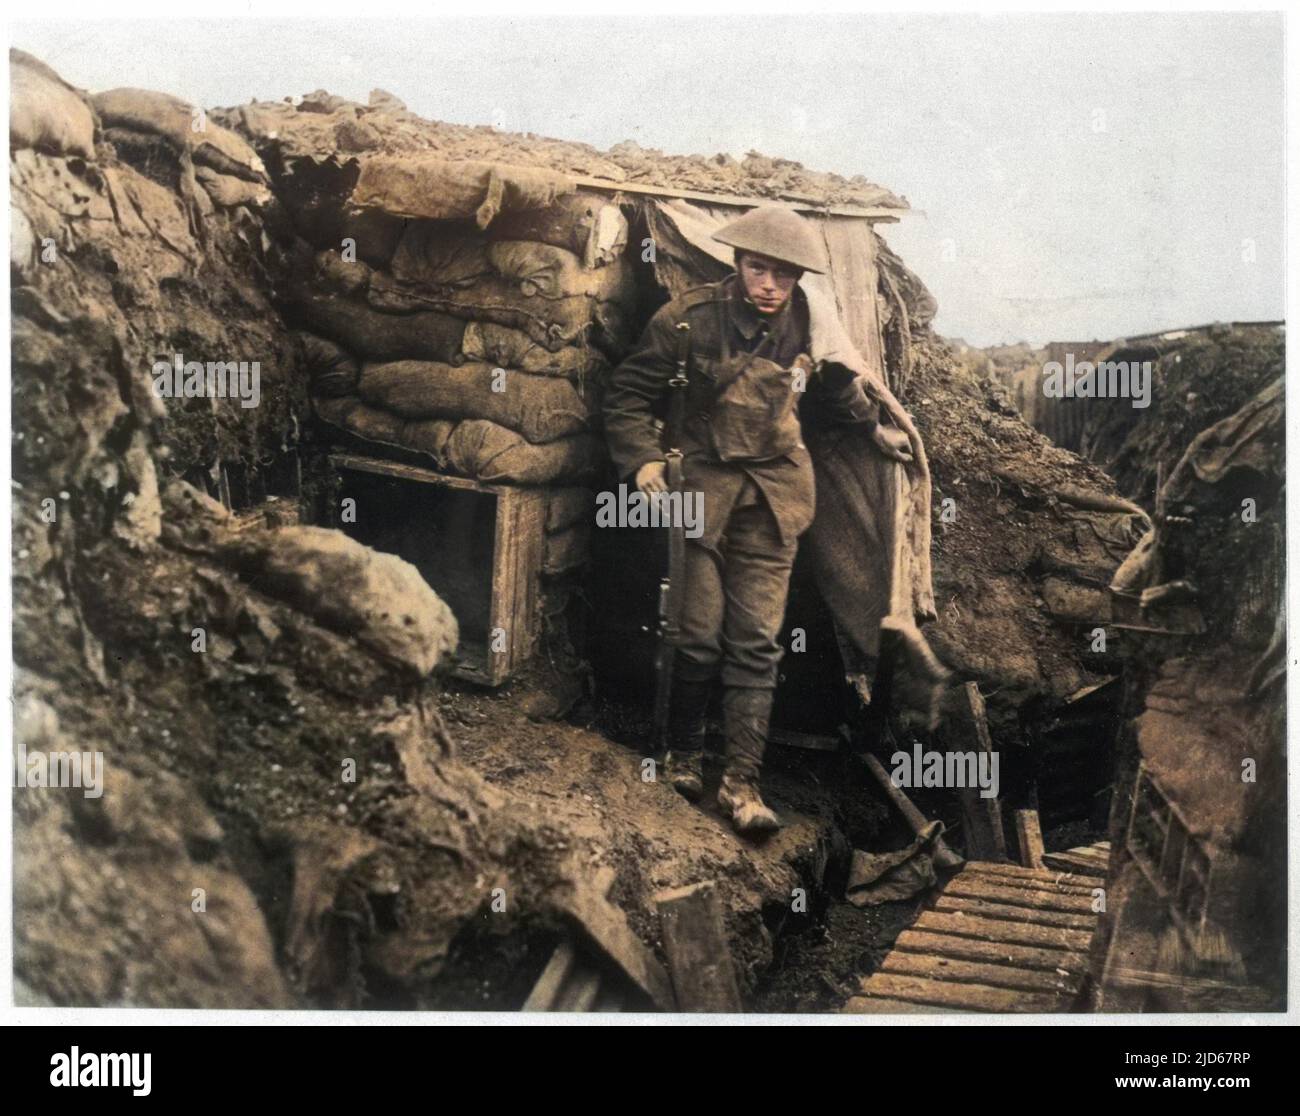 A young British soldier emerges from shelter in a trench. Colourised version of : 10023924 Stock Photo